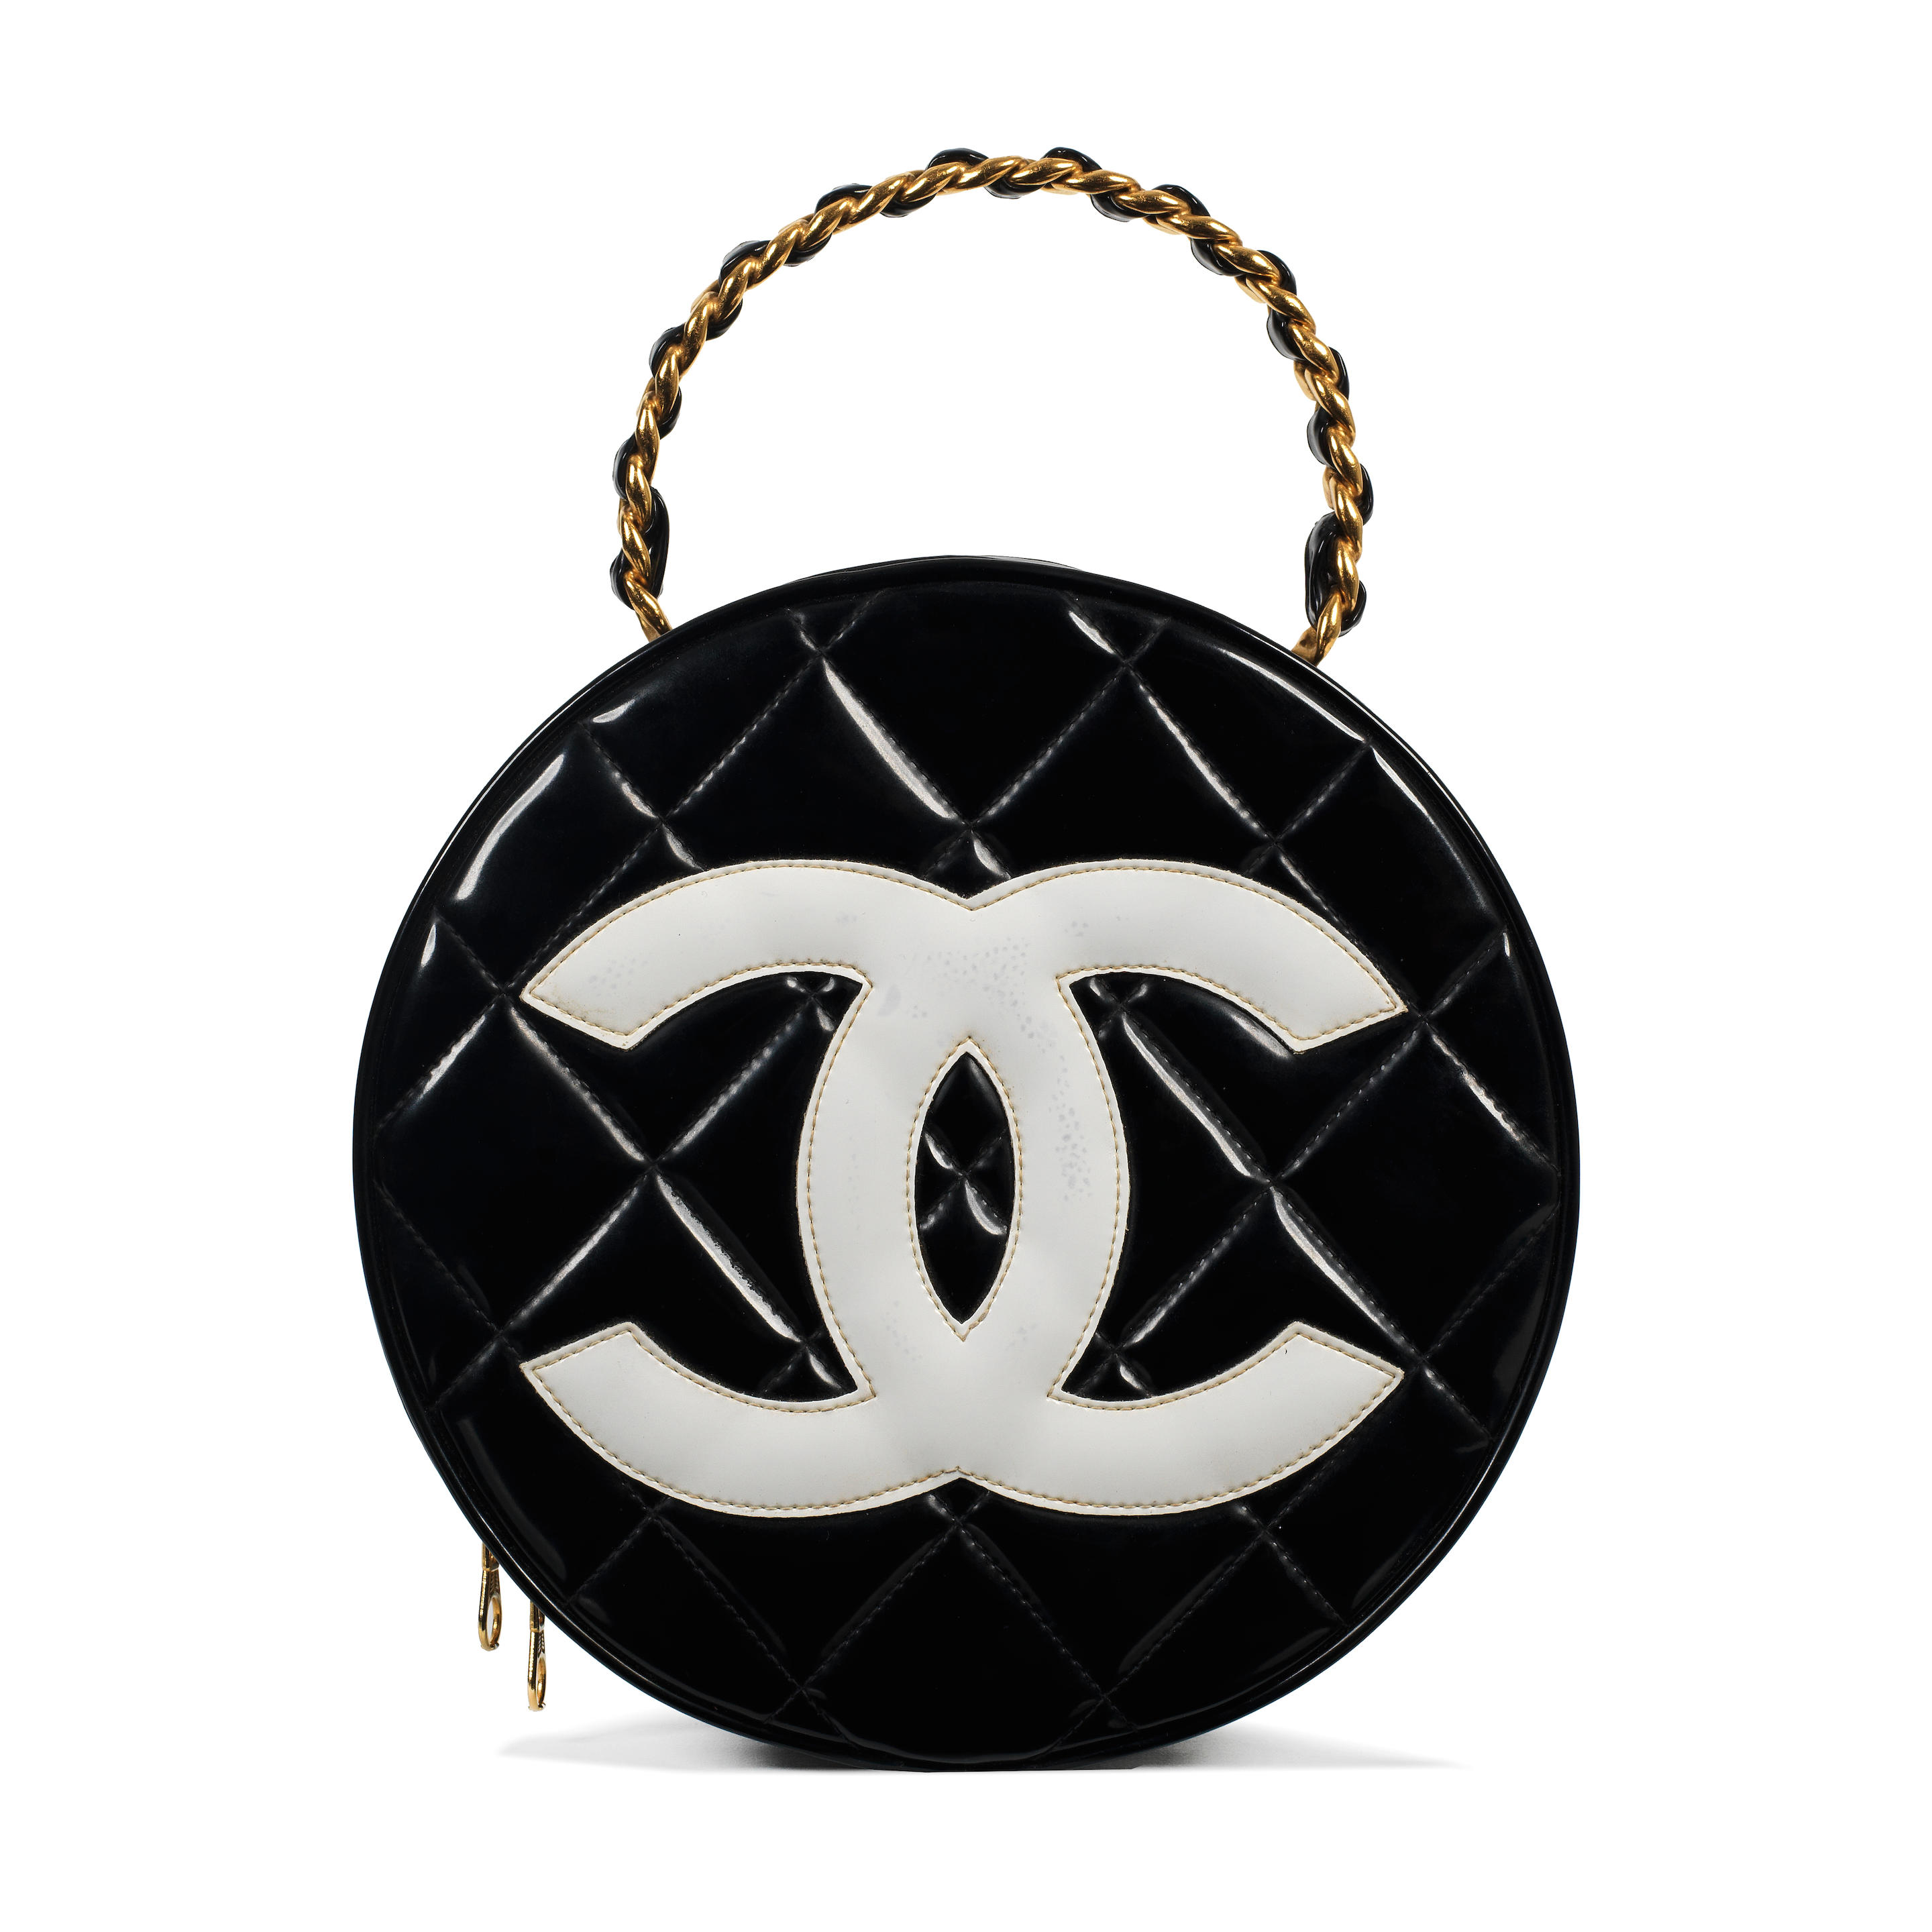 Bonhams : Karl Lagerfeld for Chanel a Black Patent CC Round Vanity Case  Spring 1995 (includes serial sticker, authenticity card, booklet and dust  bag)